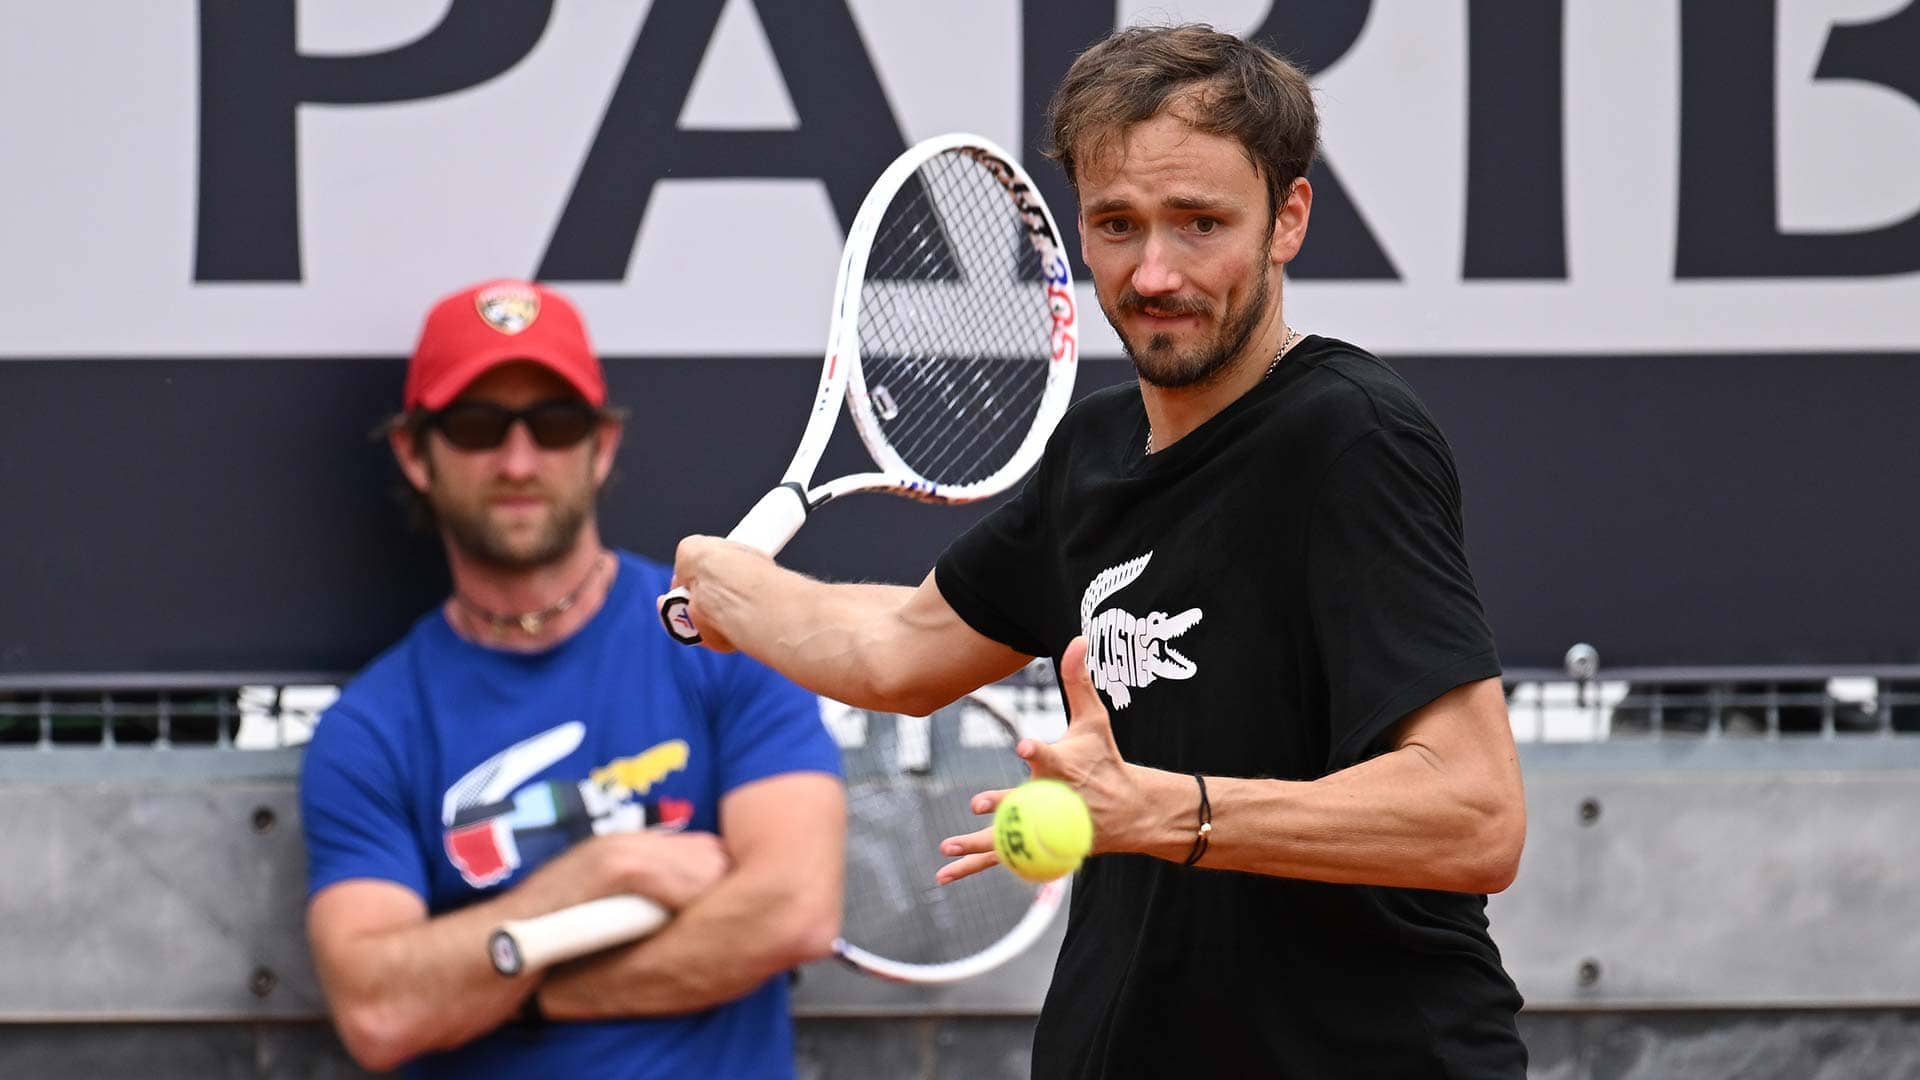 How Medvedev's Rome triumph altered his perspective on clay